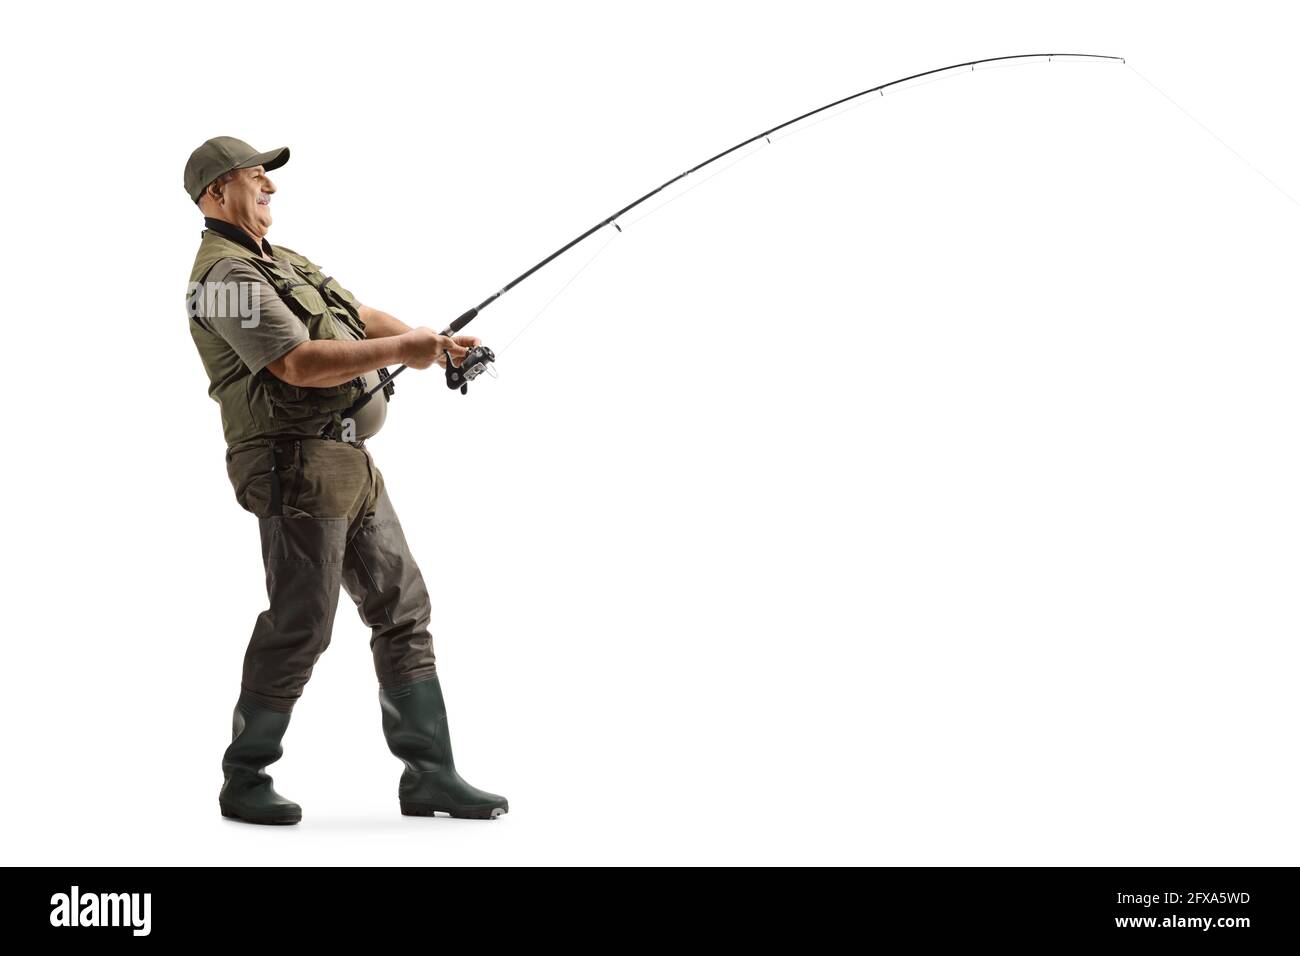 Fishing Cut Out Stock Images & Pictures - Alamy